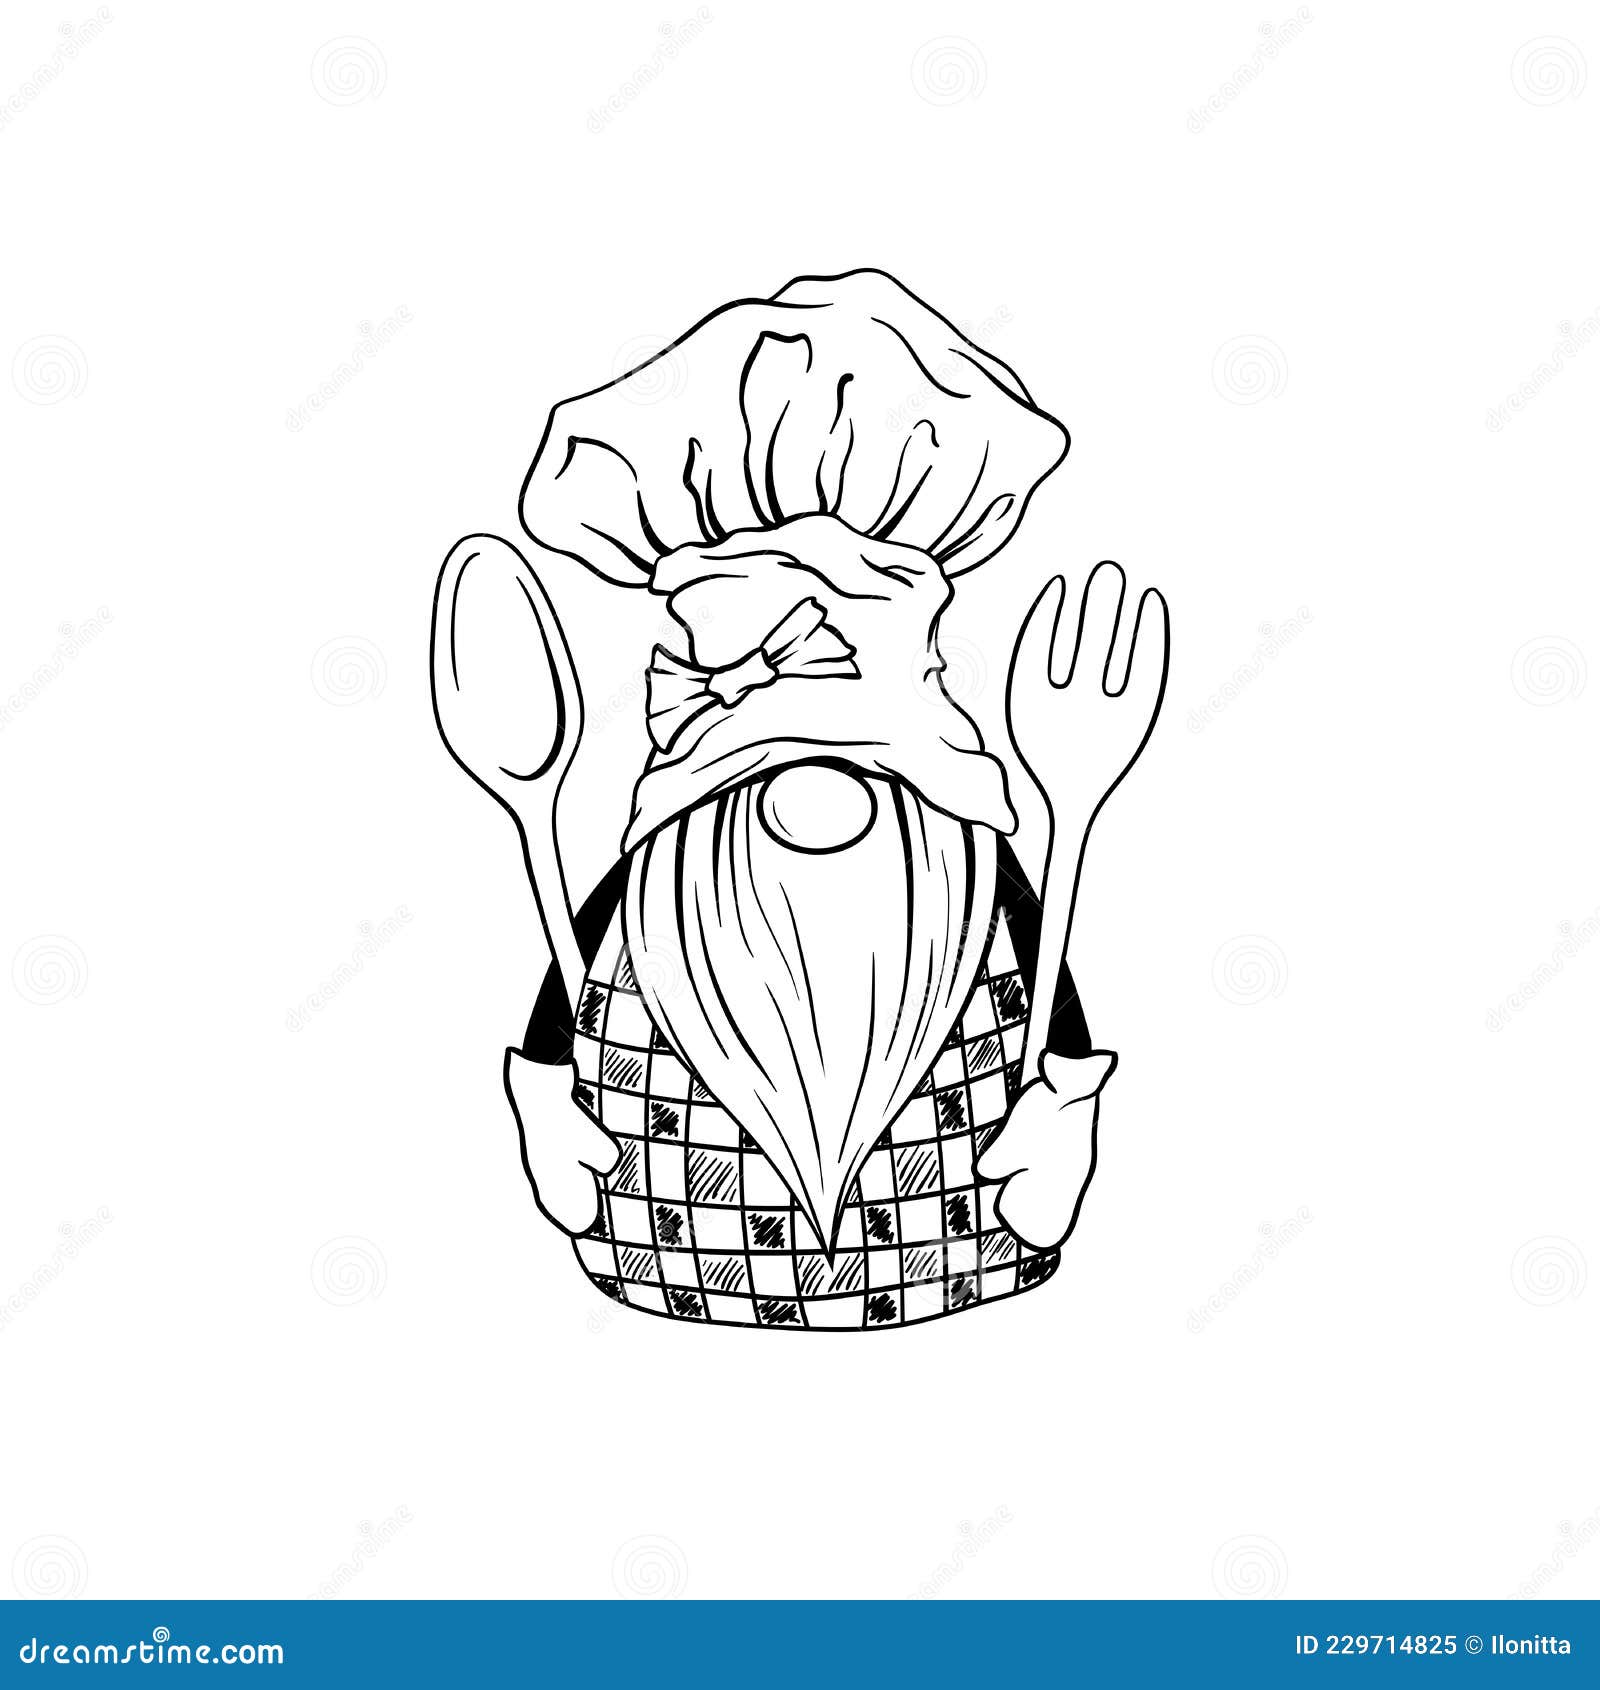 https://thumbs.dreamstime.com/z/gnome-cook-chef-dwarf-chief-kitchen-hat-toque-cooking-fork-spoon-vector-cartoon-character-elf-cap-apron-holding-229714825.jpg